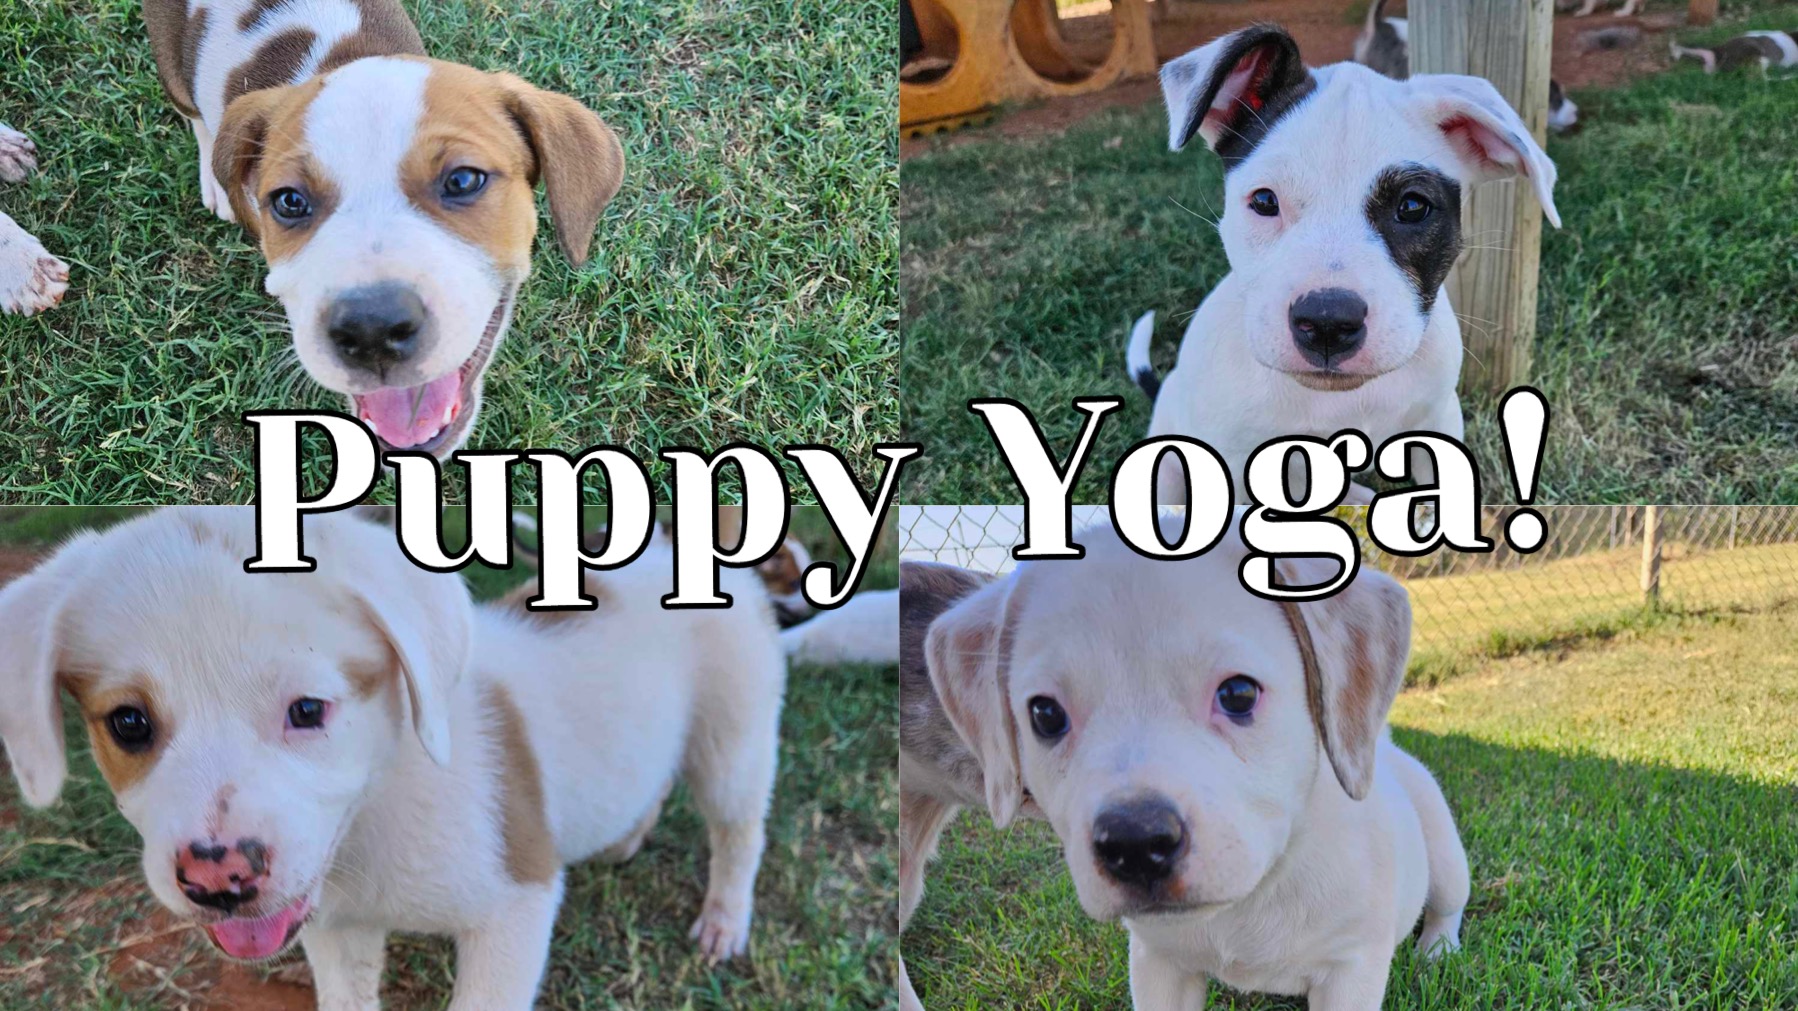 A group of puppies in a grassy area with the words puppy yoga.